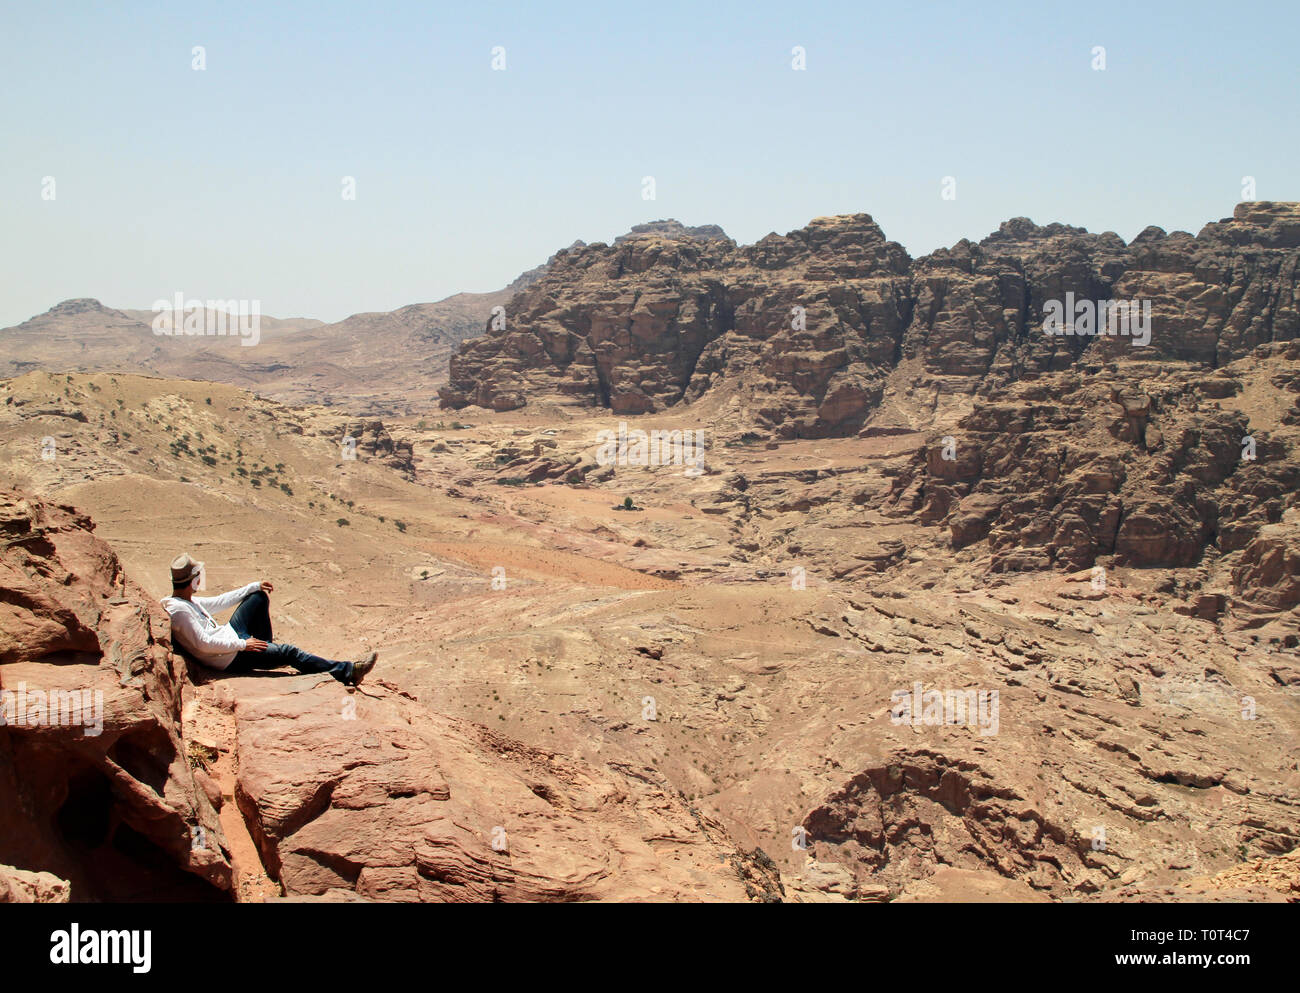 Man wearing a hat sitting on a hill and looking over the rugged landscape of Petra, Jordan Stock Photo